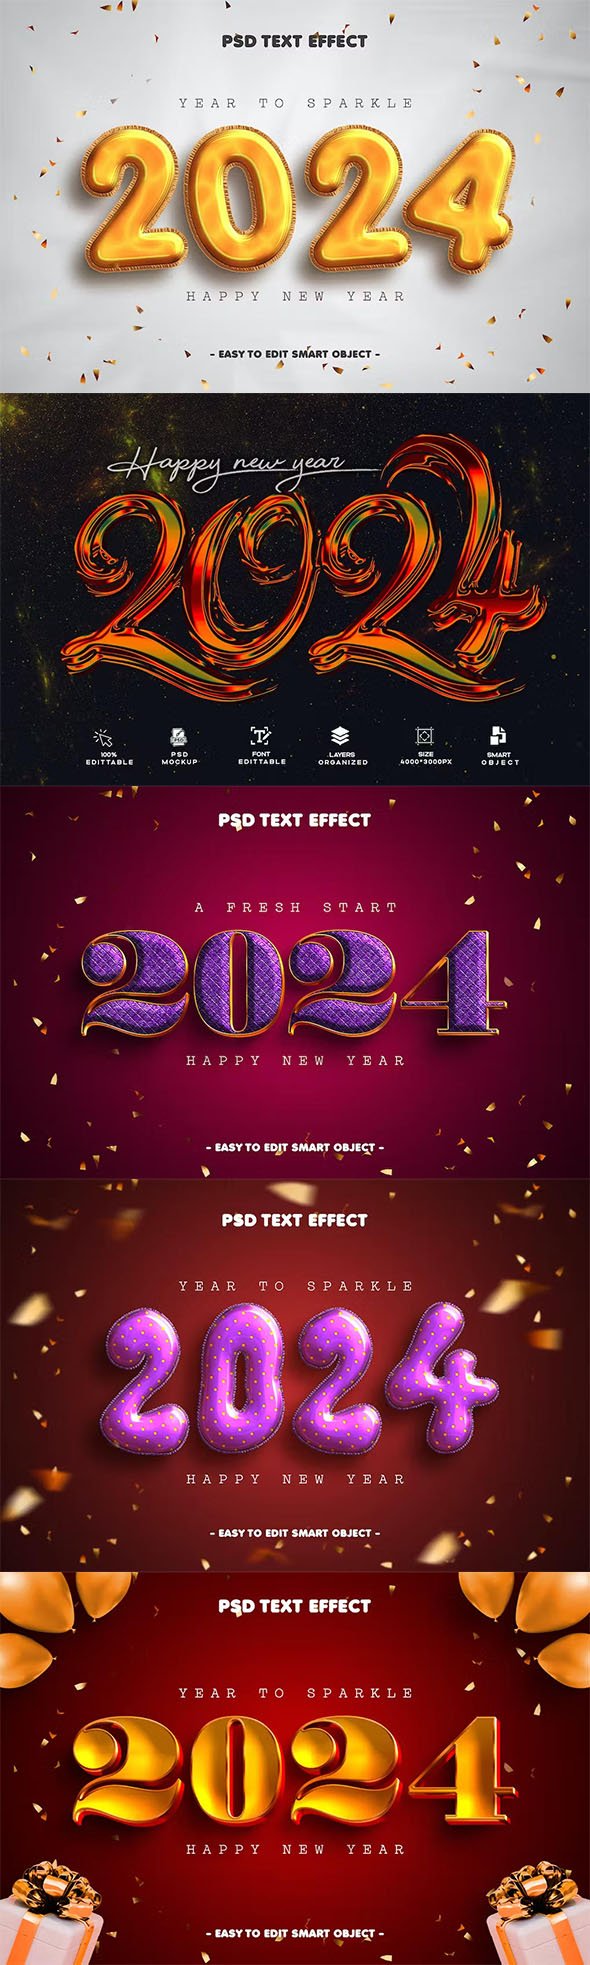 1700597749_new-year-2024-text-effect-psd